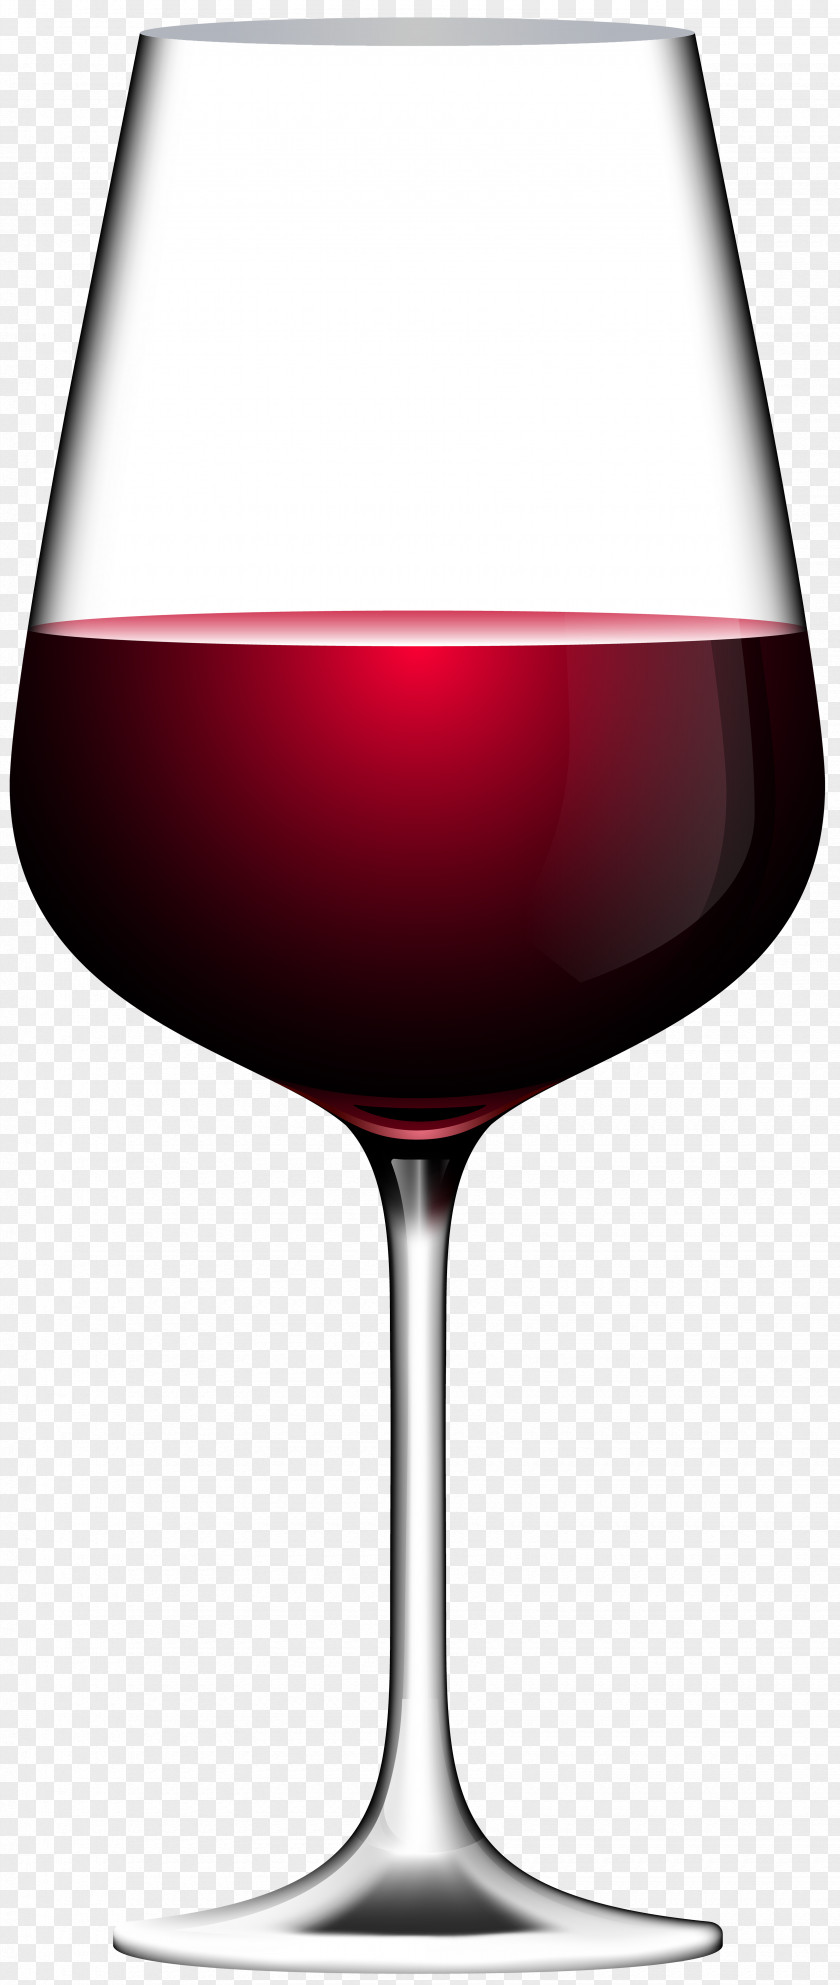 Red Wine Glass Transparent Clip Art Image Champagne PNG